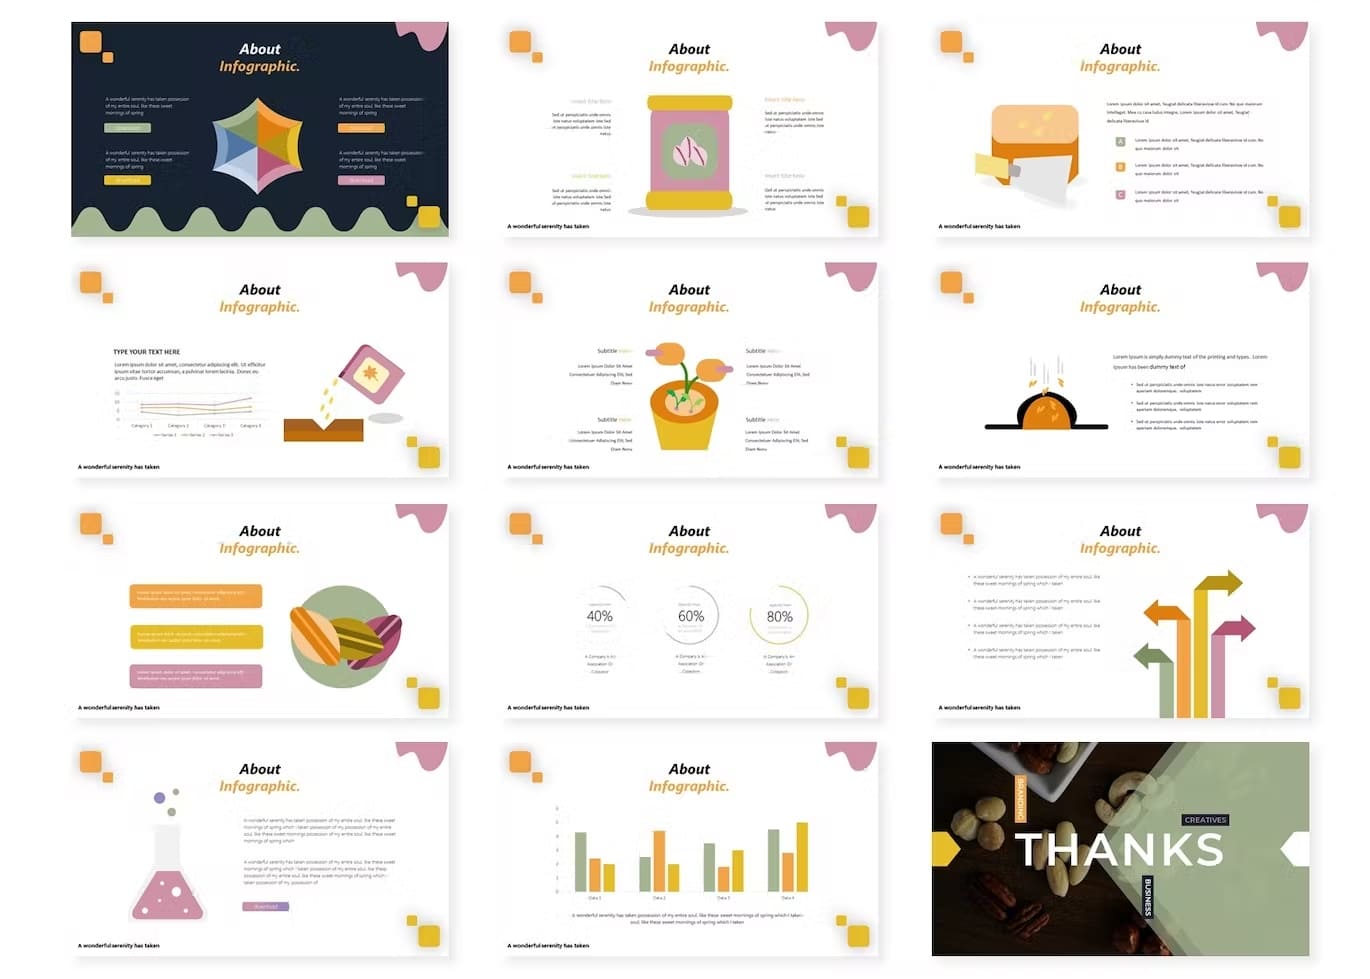 12 Slides Template Itseeds: About Infographic, Thanks.